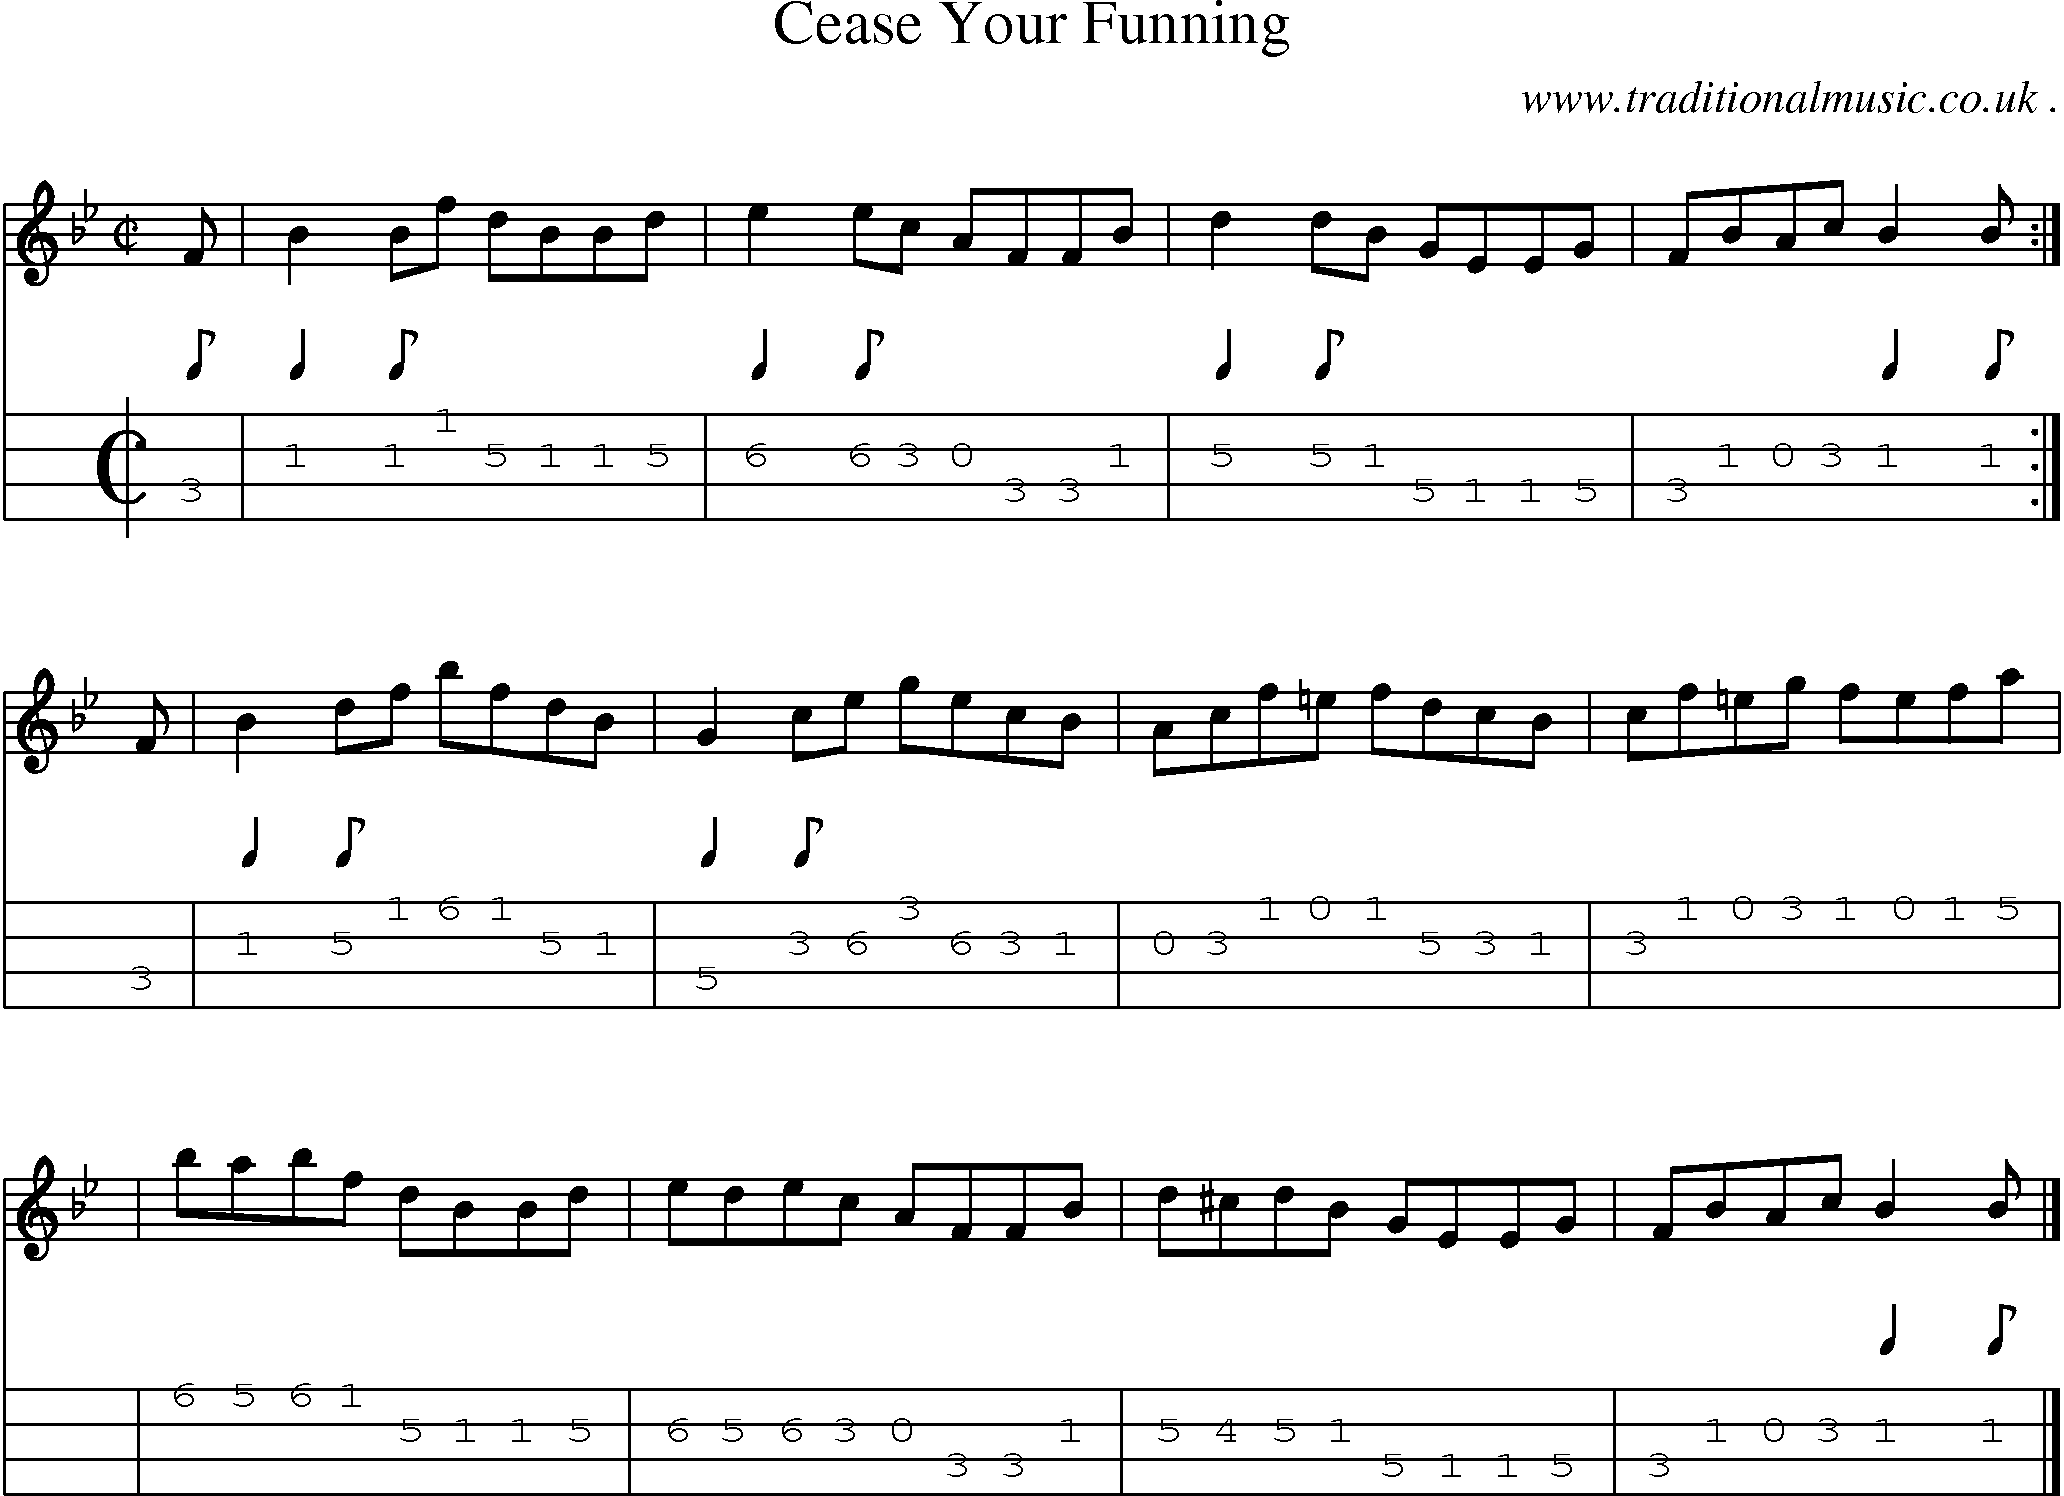 Sheet-music  score, Chords and Mandolin Tabs for Cease Your Funning